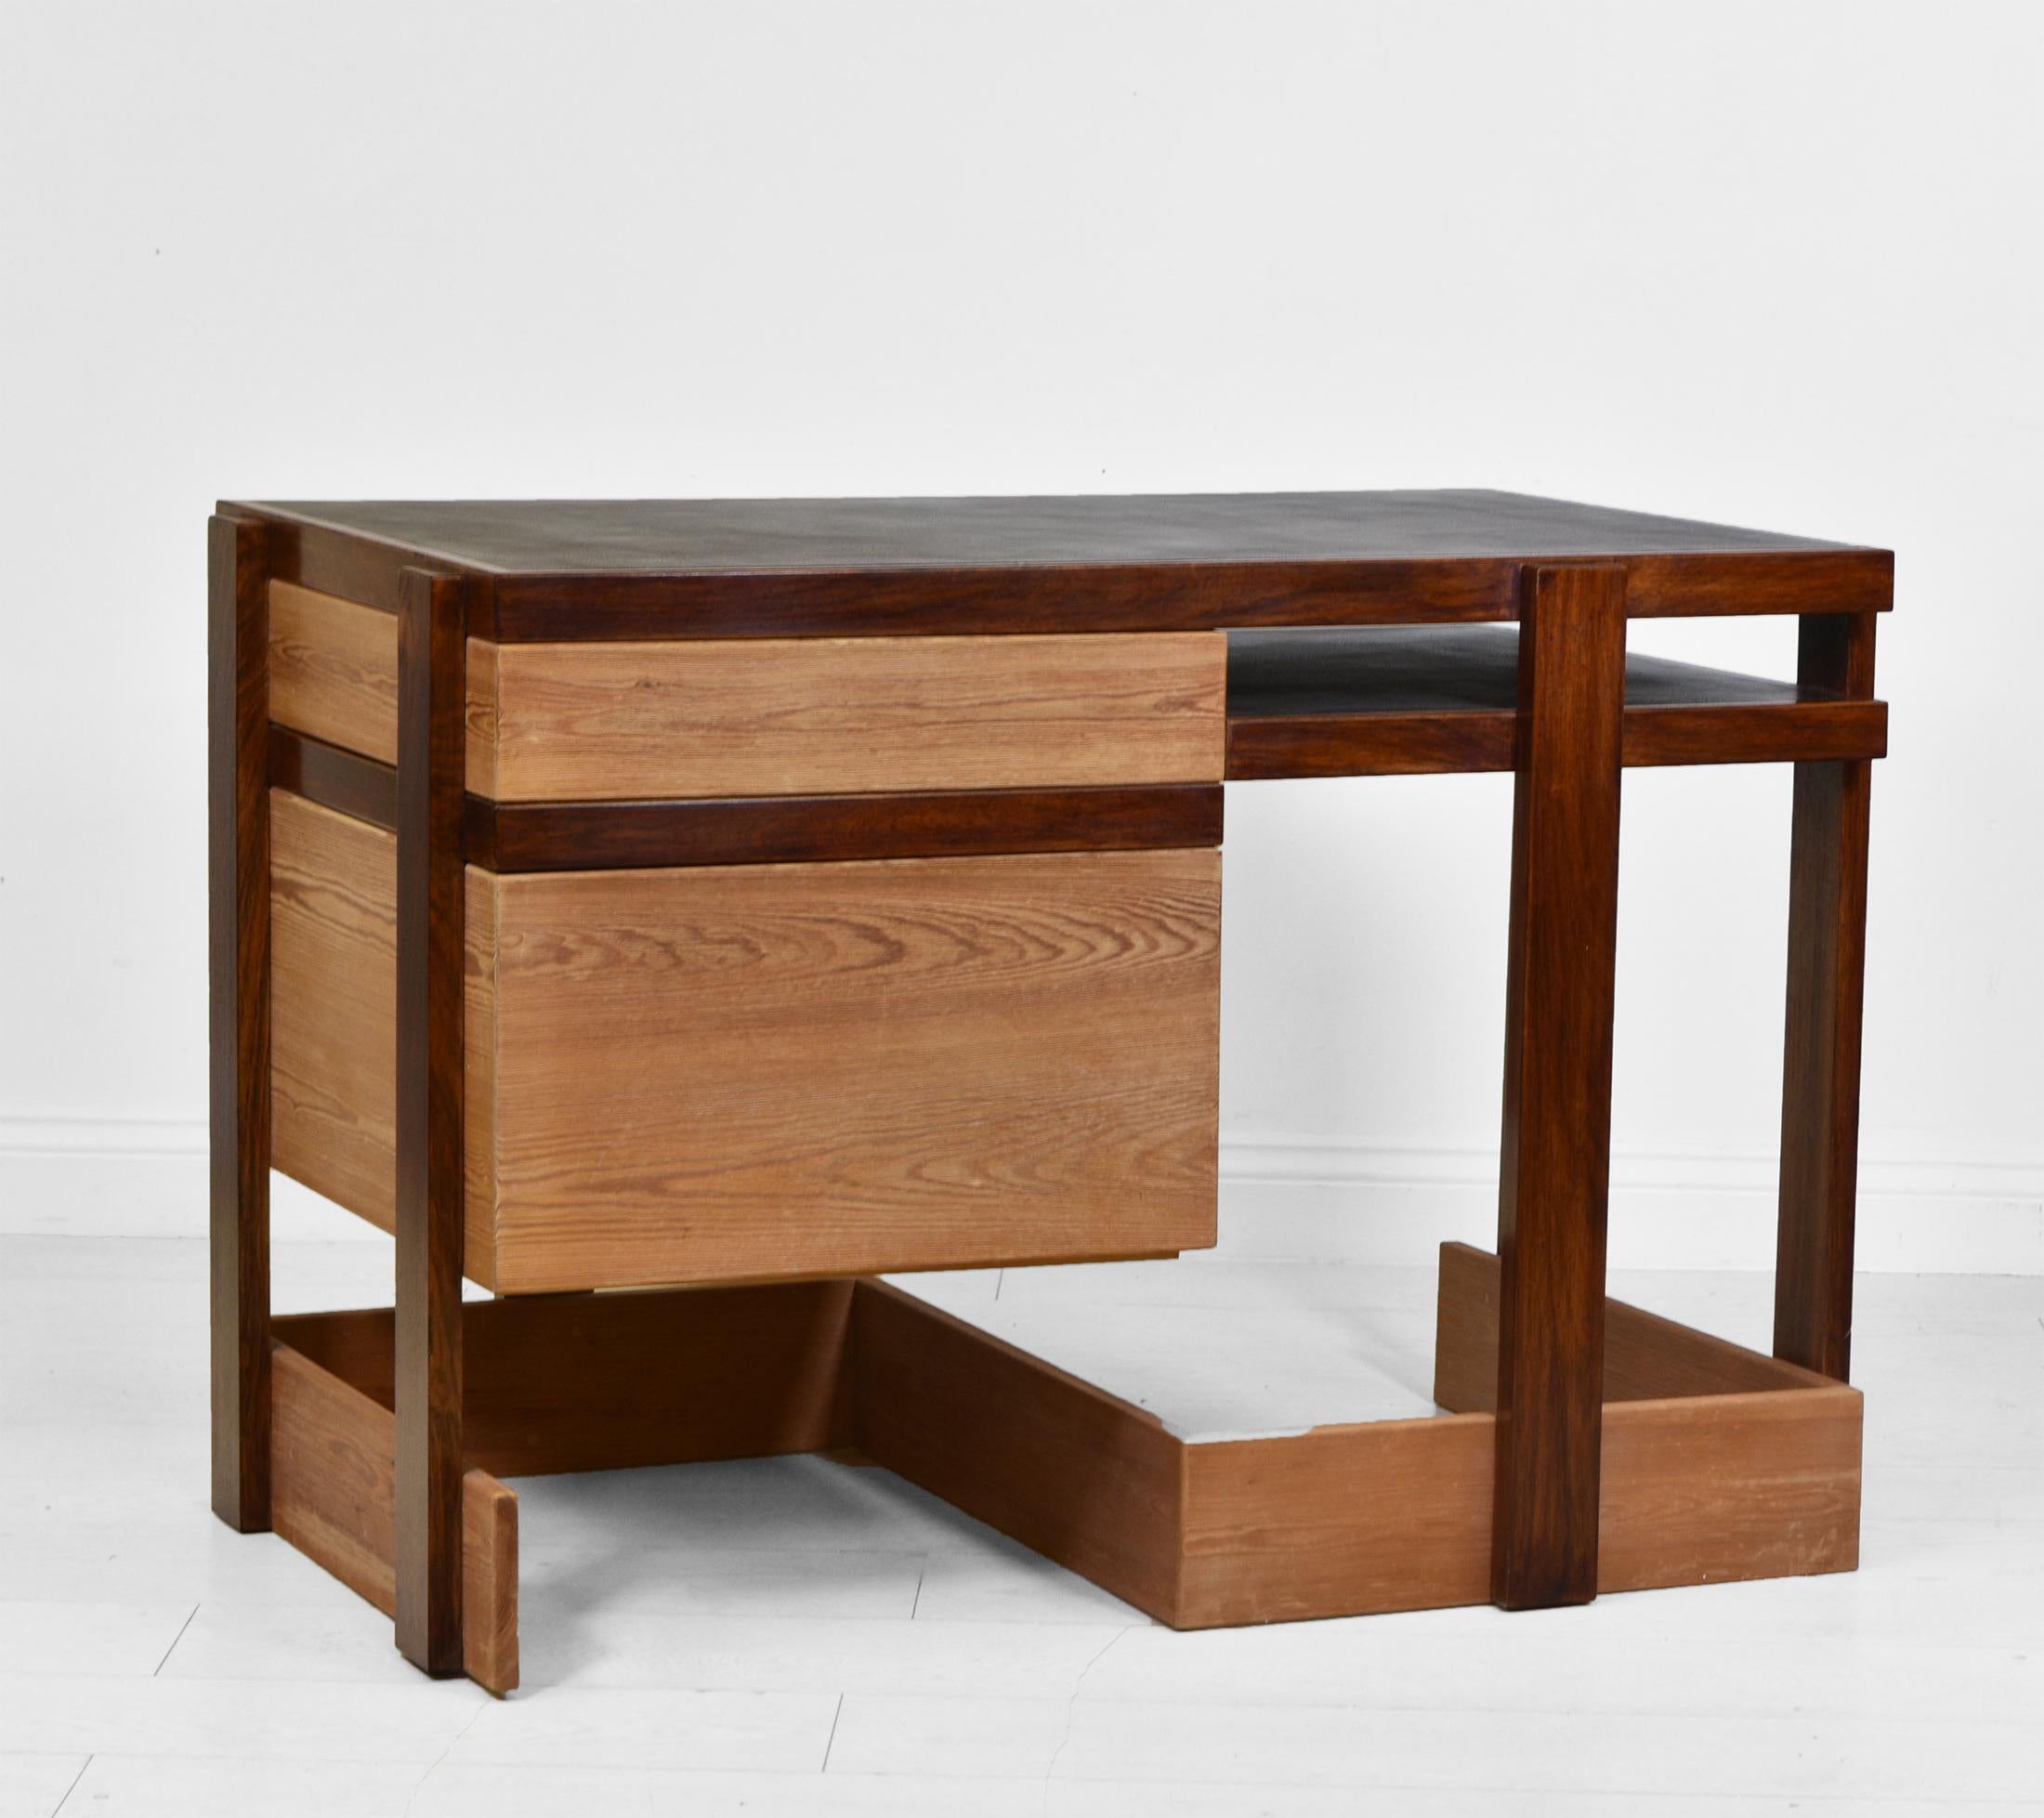 An English Modernist design solid Bombay rosewood and scrubbed pine desk along with rosewood and leather chair, made by George Sneed. Circa 1978.

The desk comes with a wonderful acknowledgement in Country Life magazine from 1978, please refer to